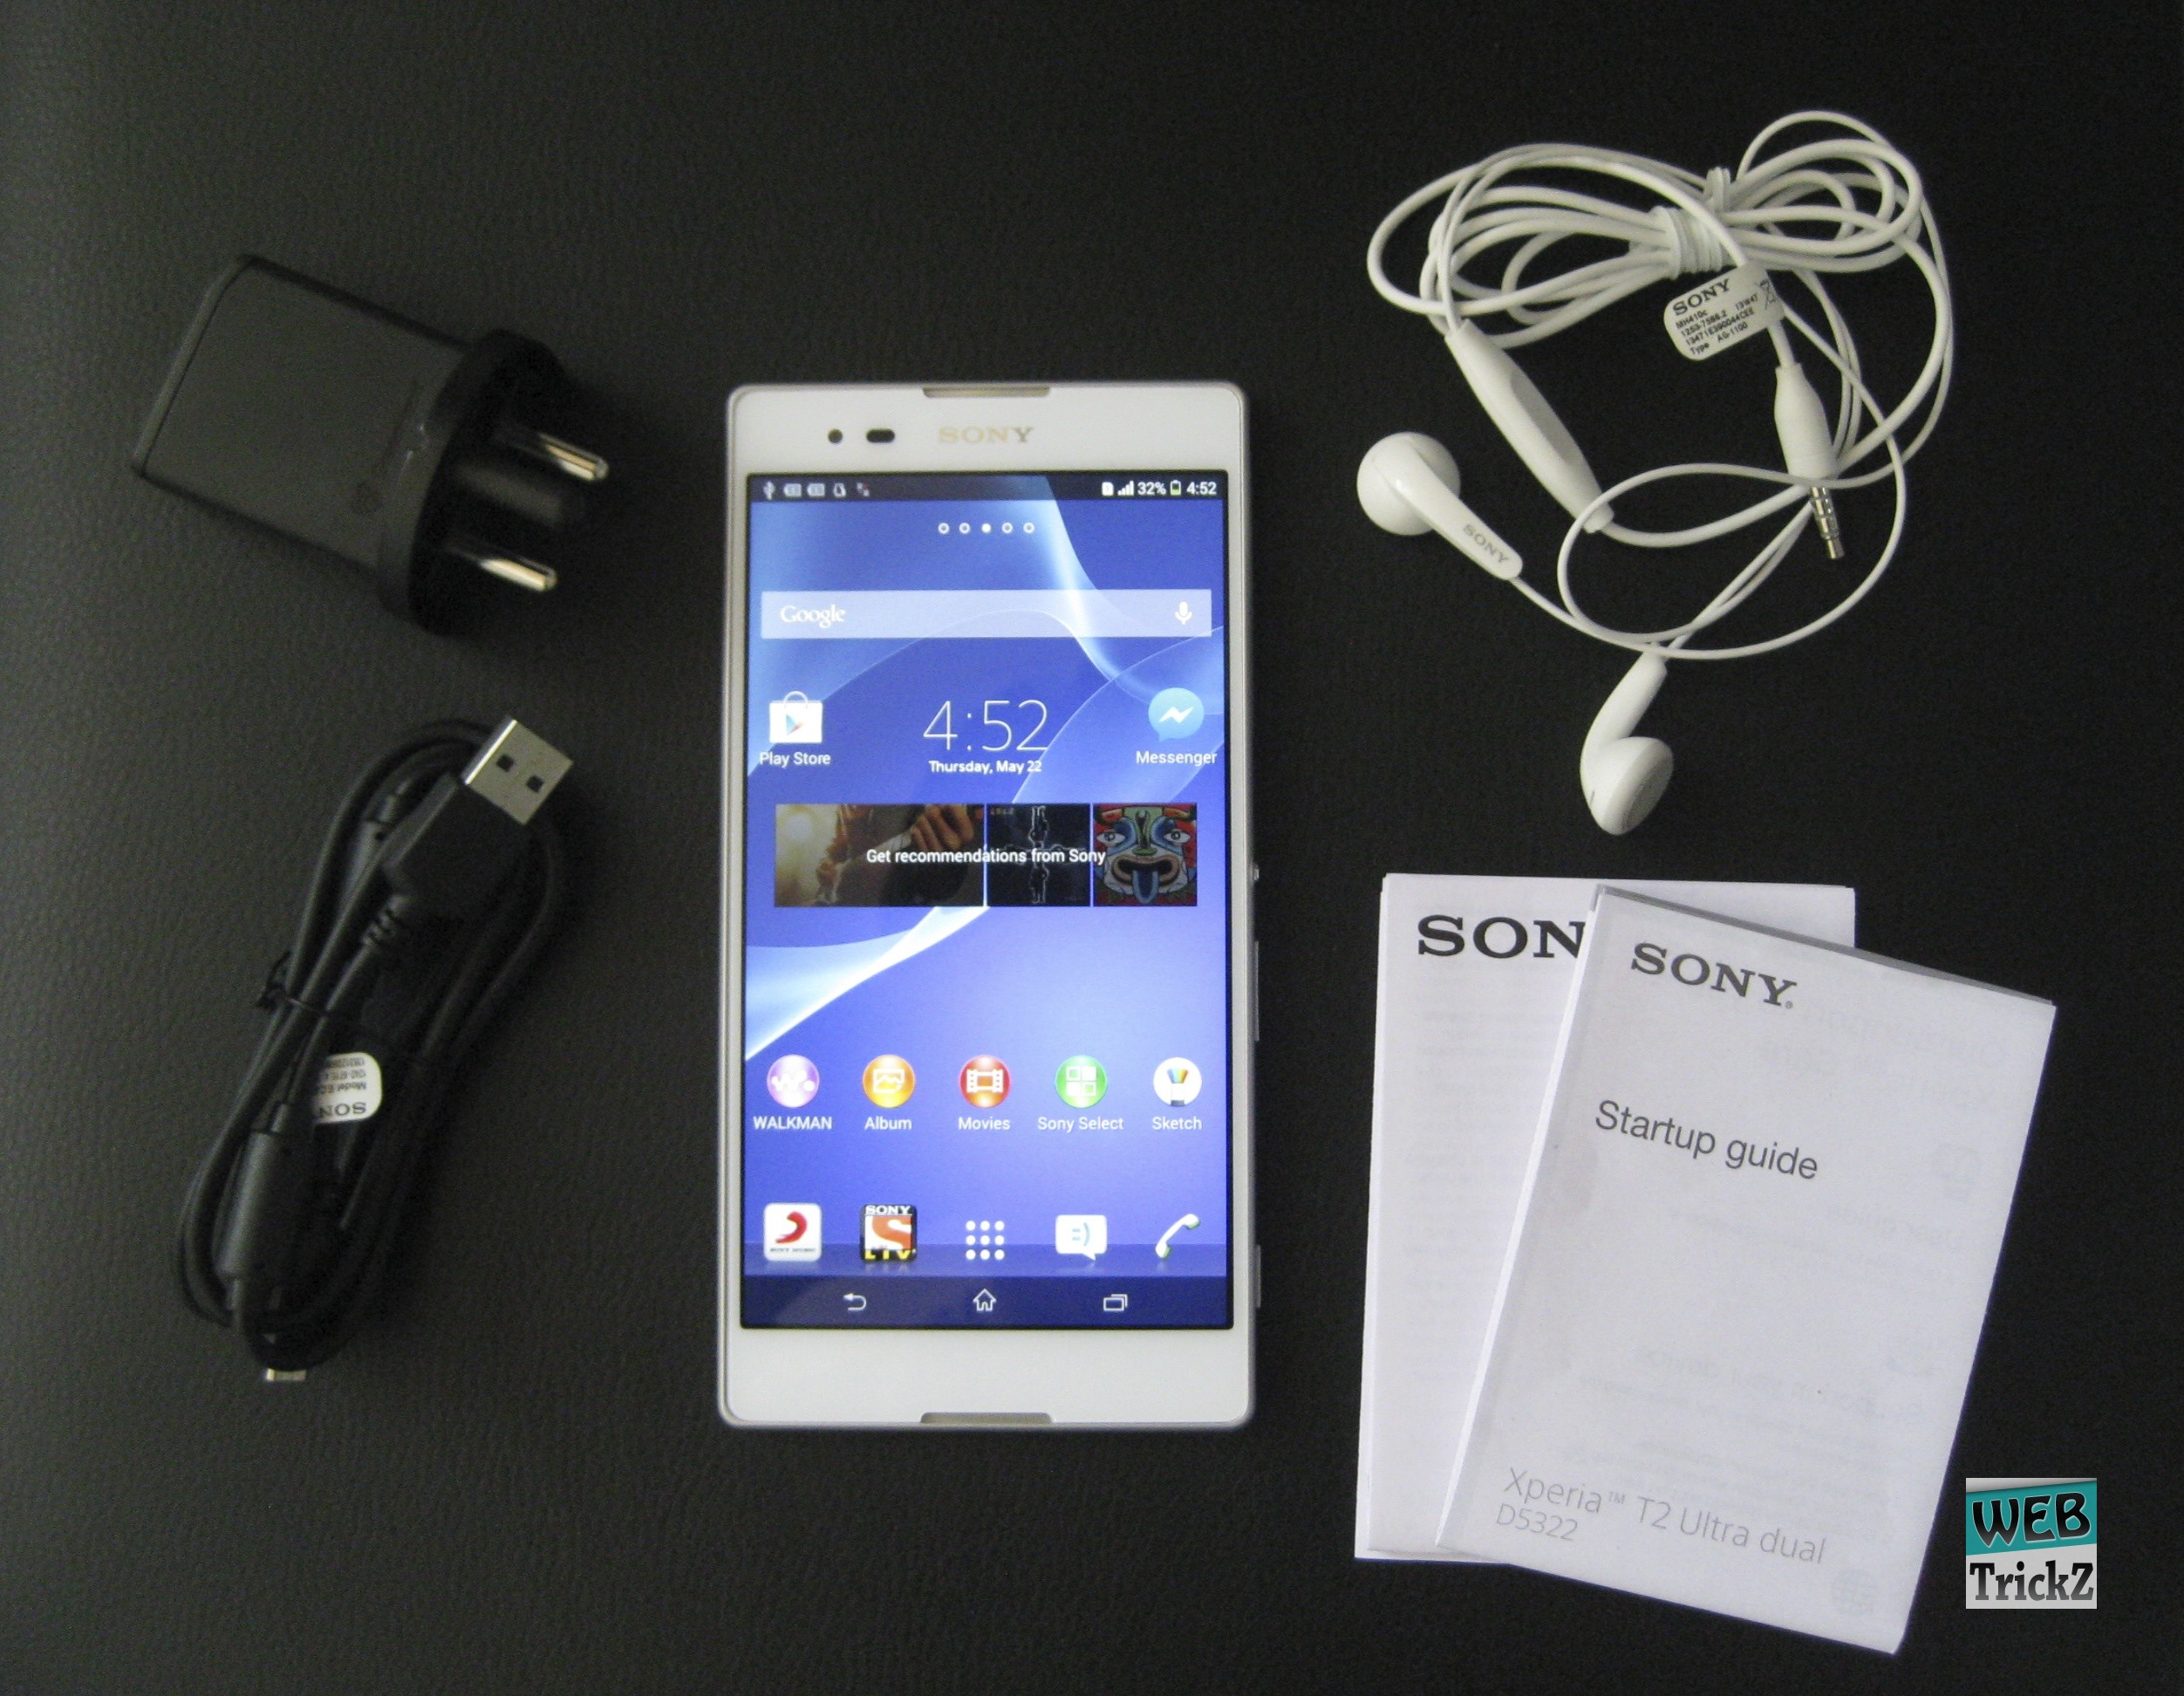 Graan essay Gronden Sony Xperia T2 Ultra Dual Review – Budget Dual-SIM Smartphone with 6”  Display & Great Battery Life